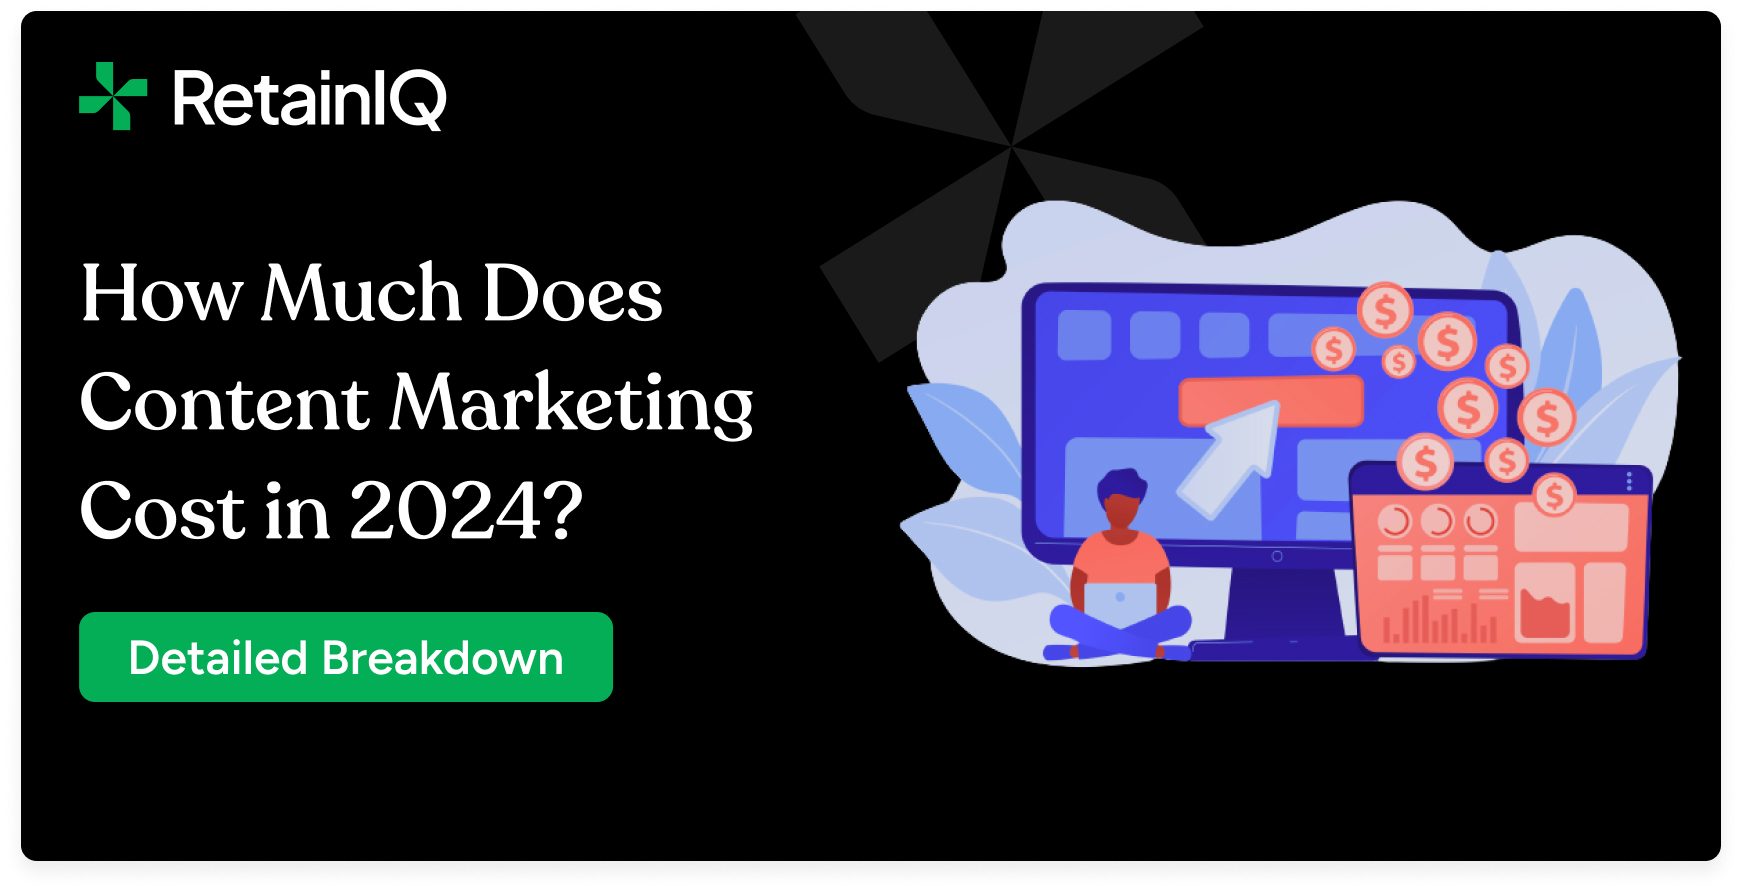 How Much Does Content Marketing Cost in 2024?